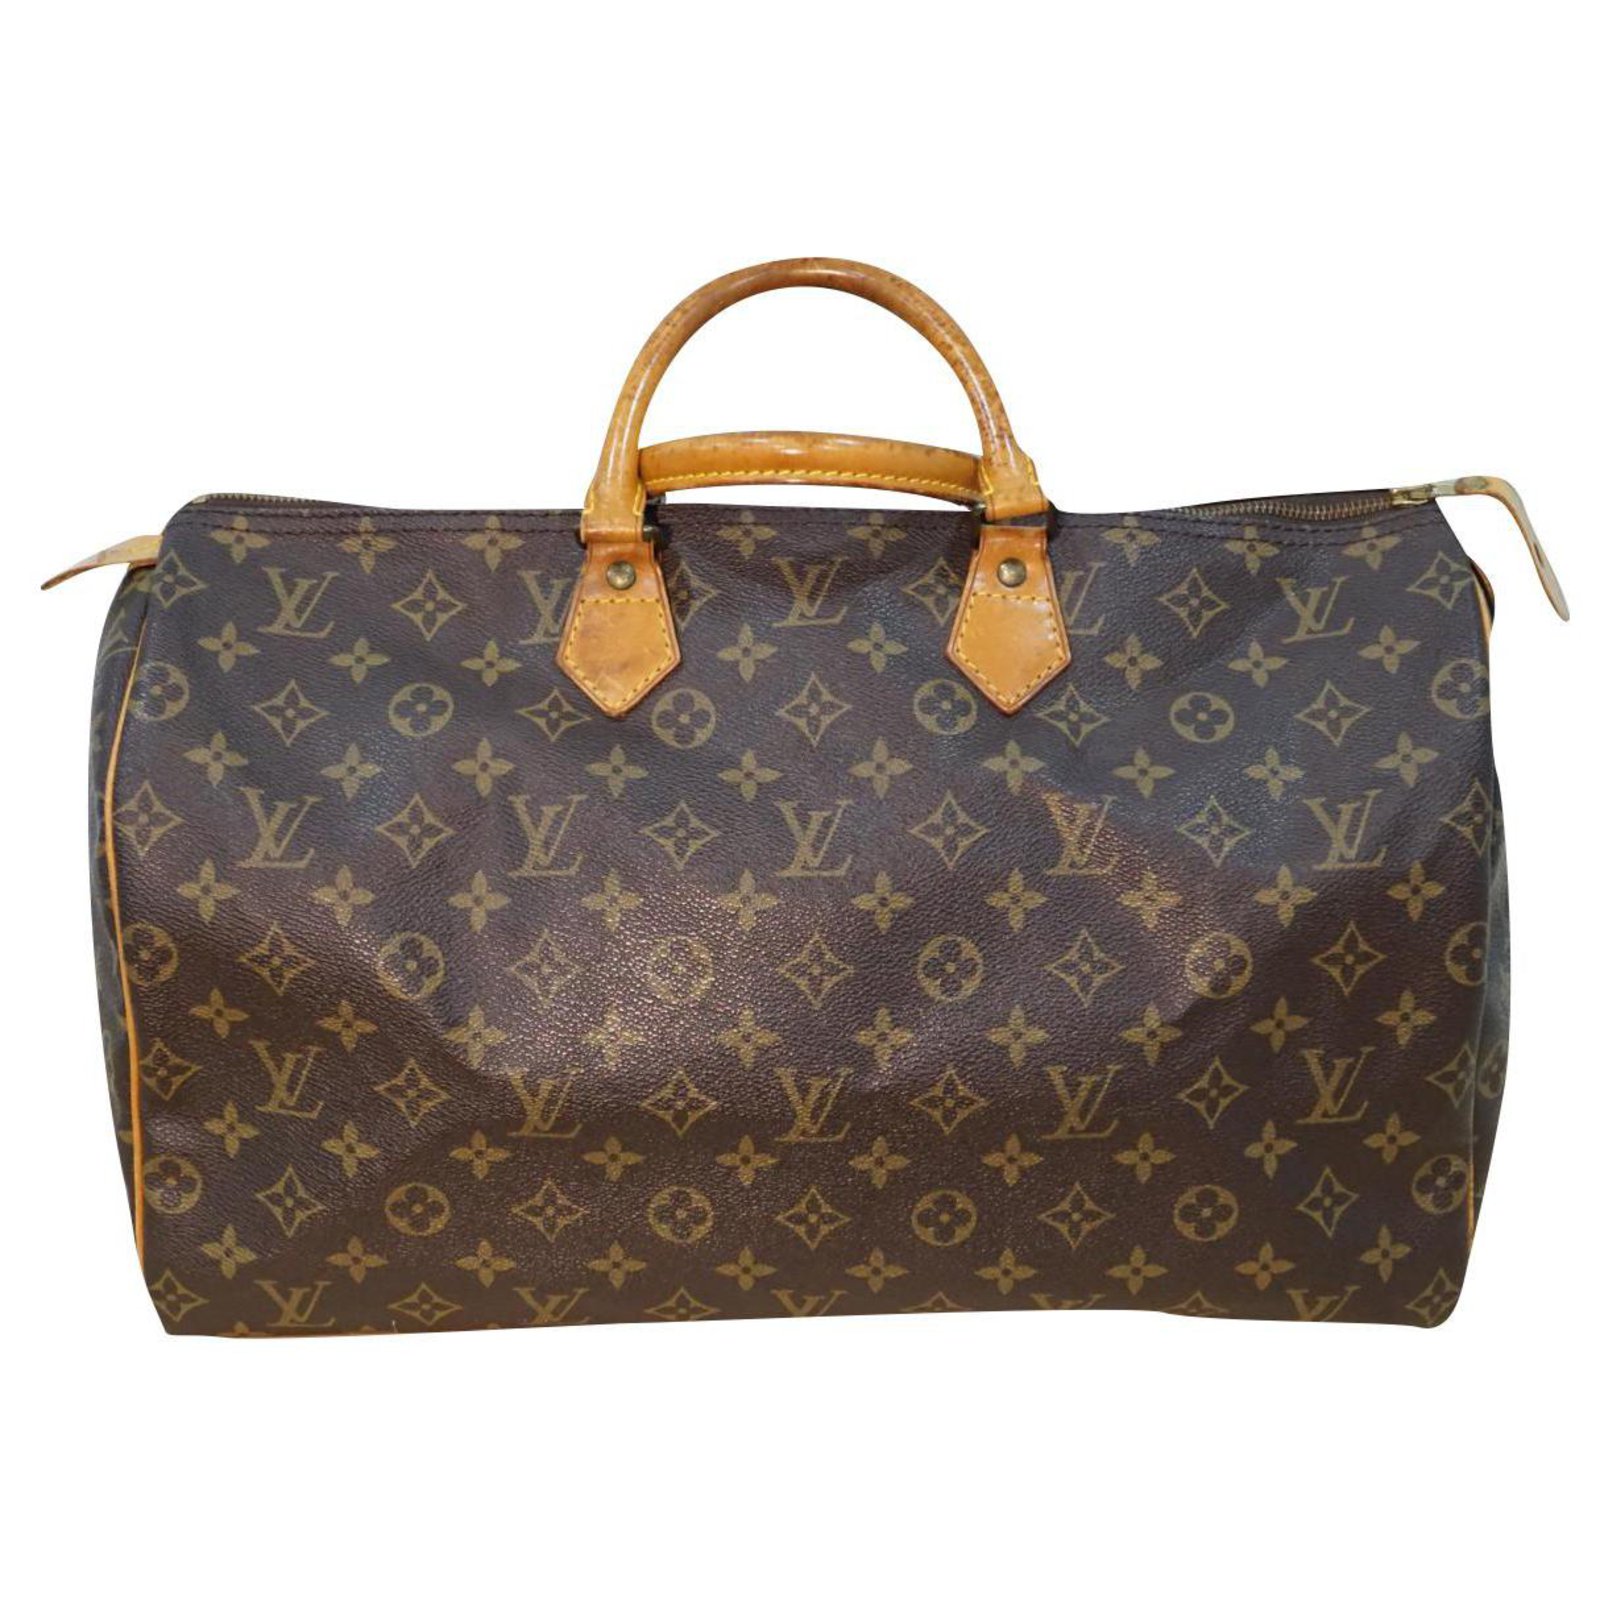 Louis Vuitton Bag For Everyday Use